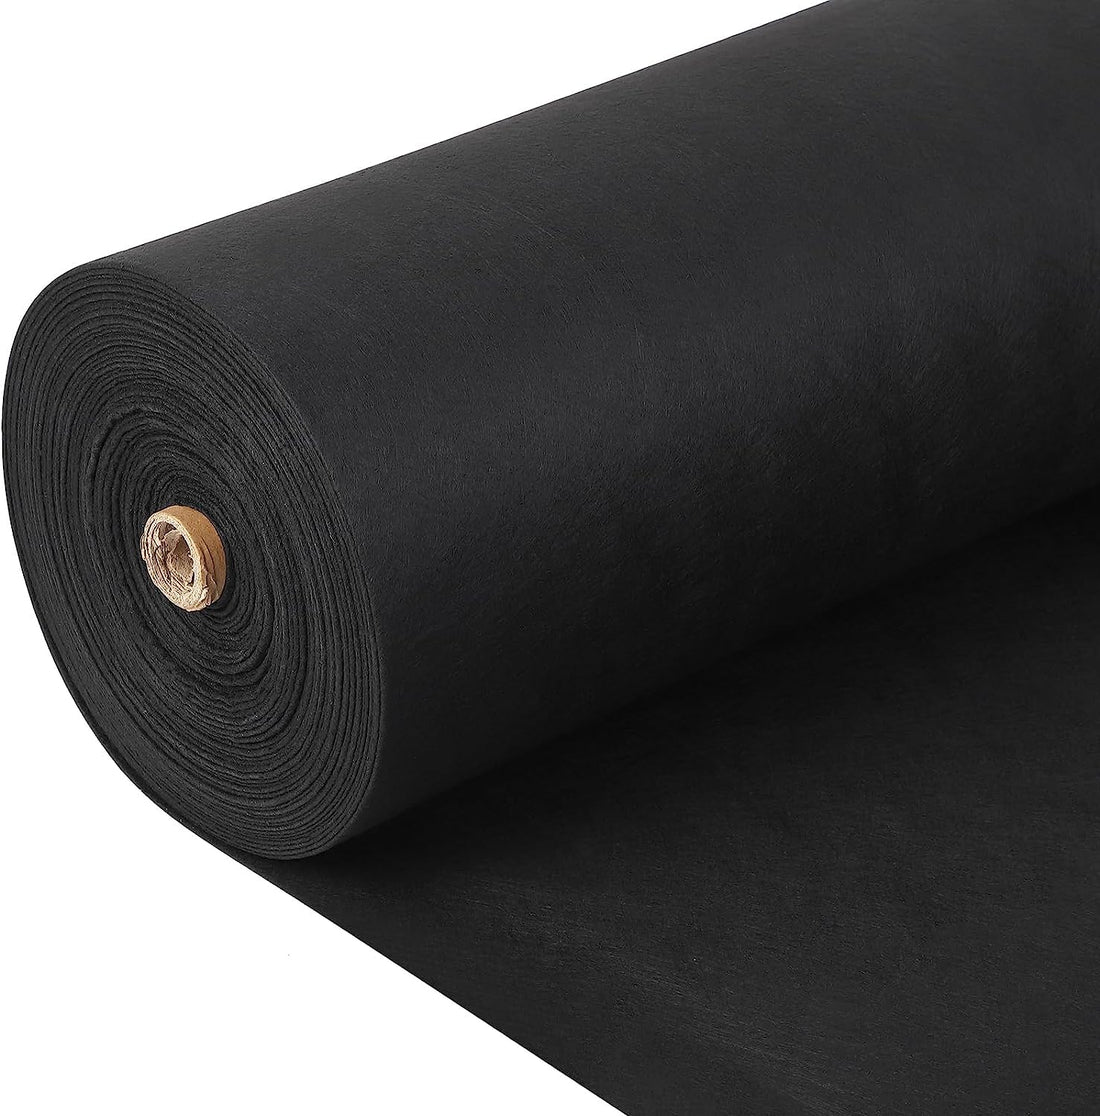 3ft x 300ft Geotextile Fabric, 6oz, 350N Strength for Driveways